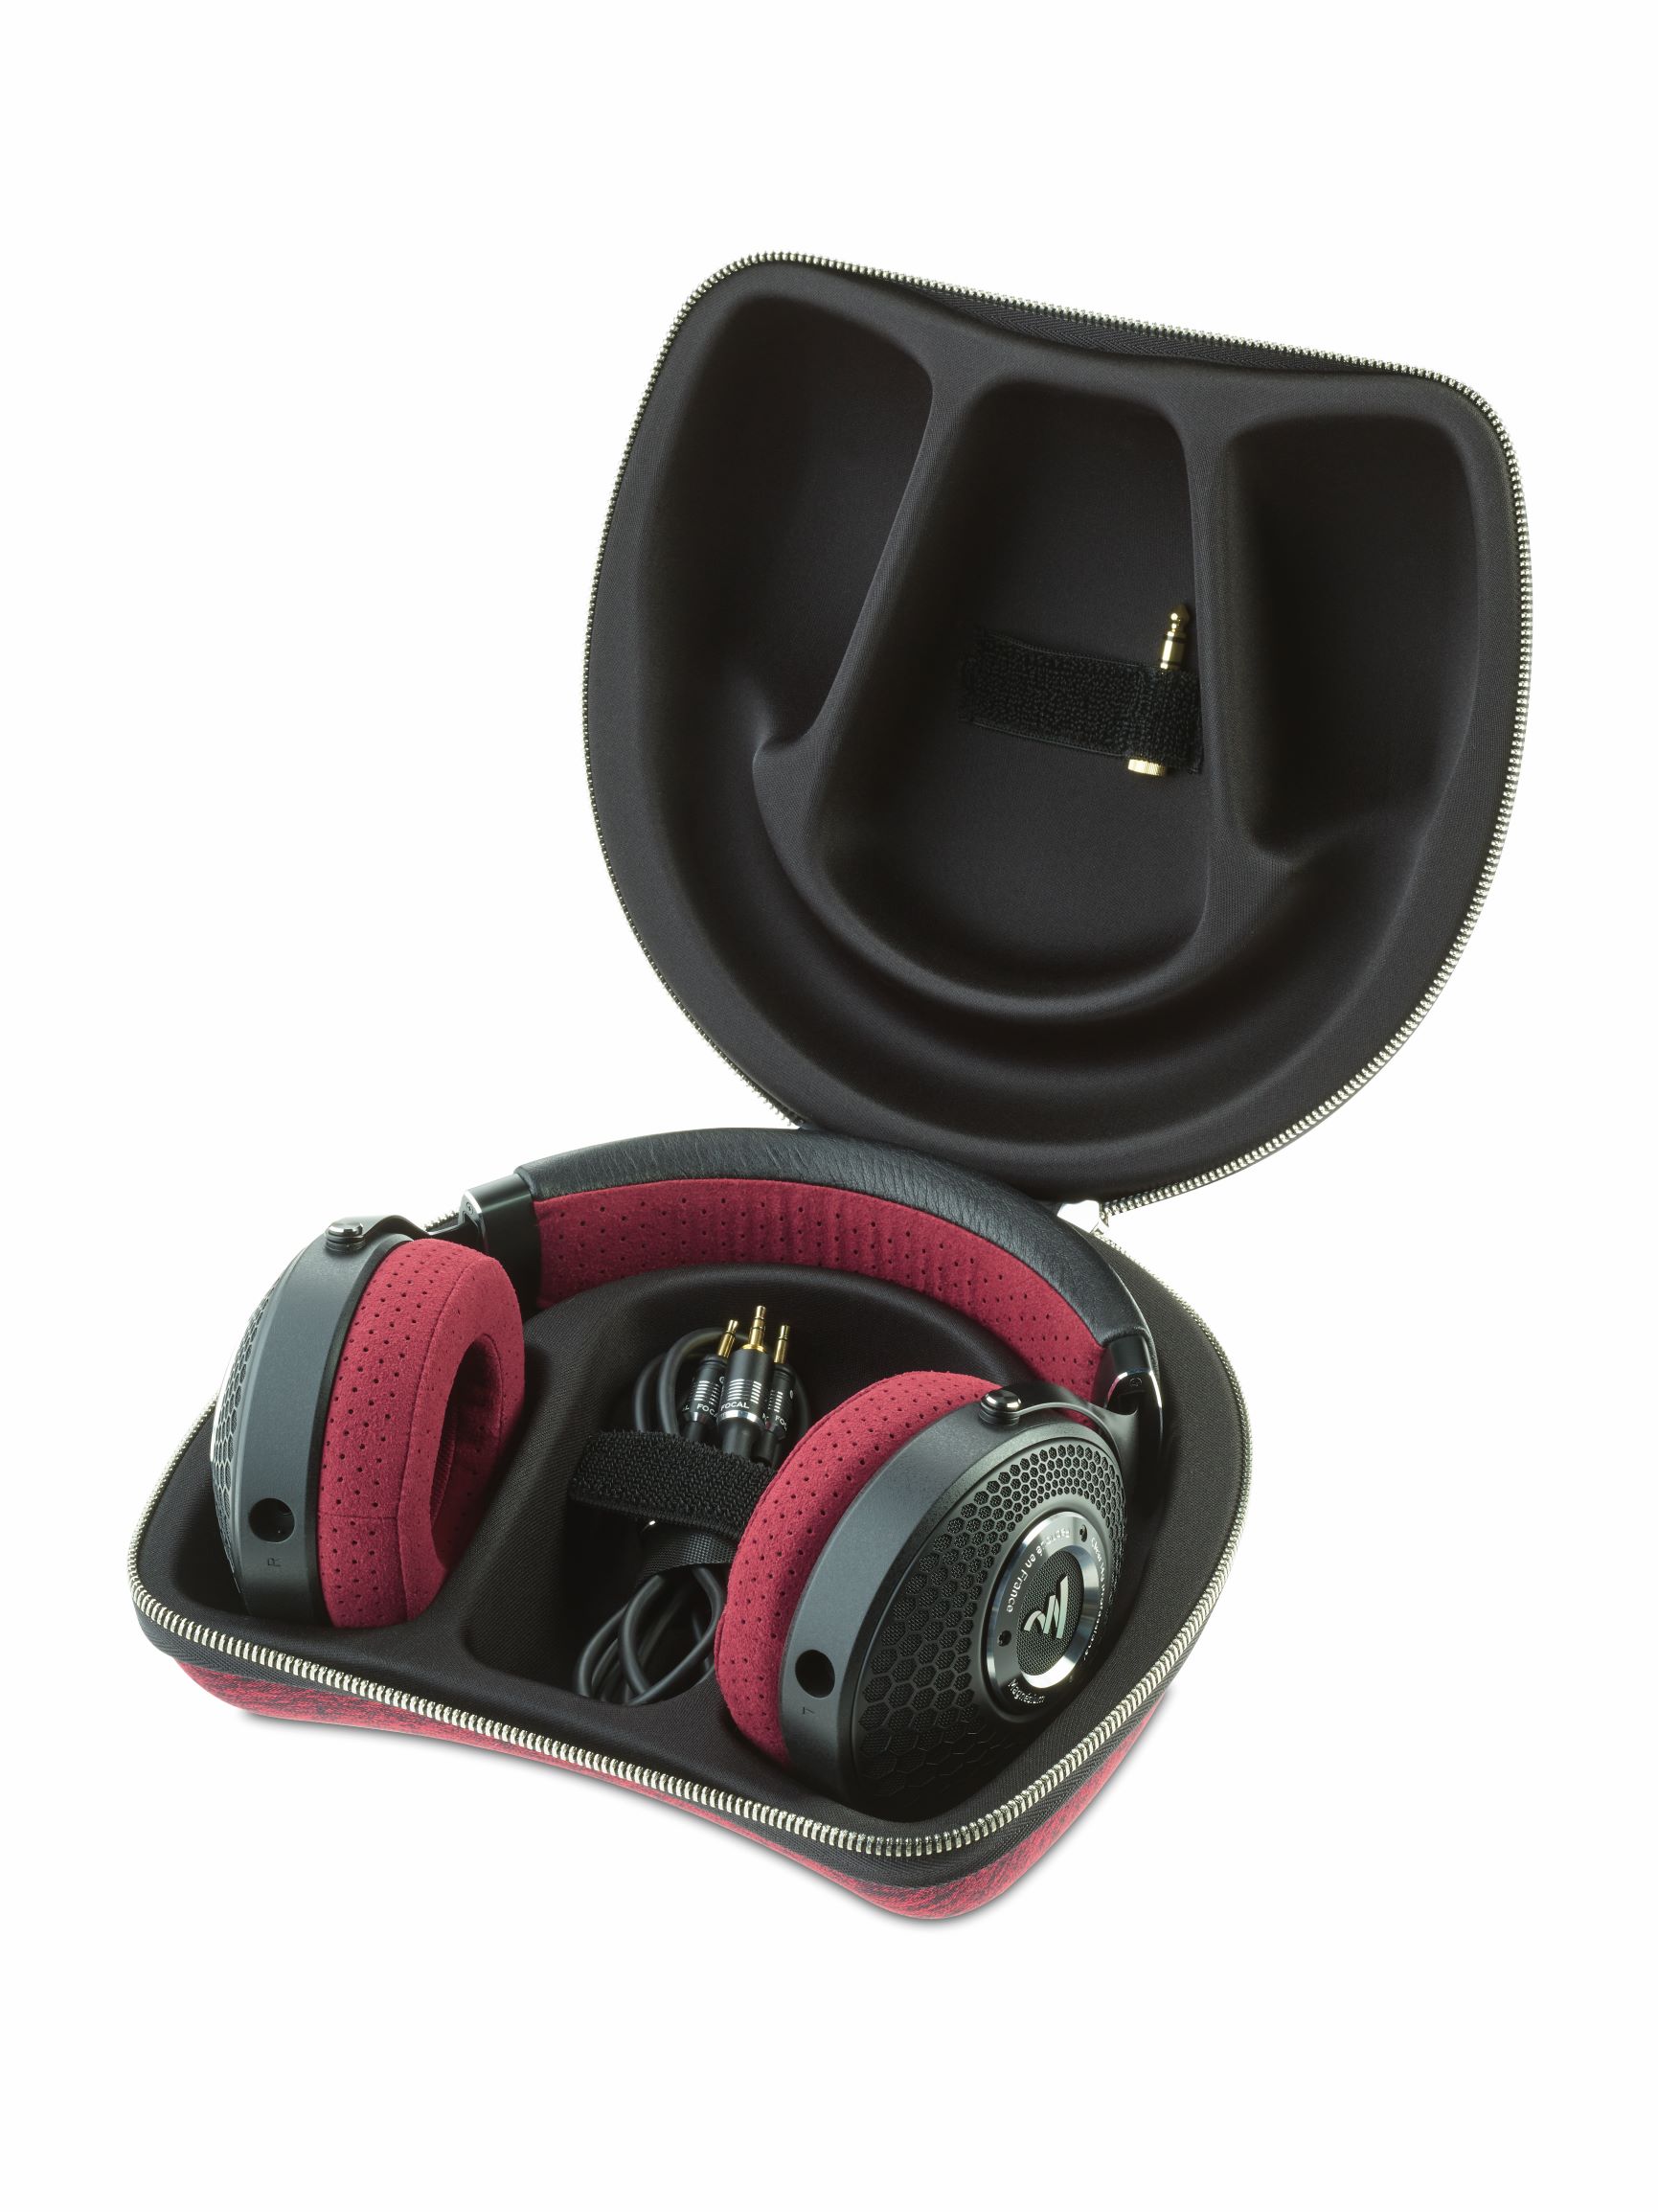 Focal Clear Mg Professional - Open headphones - Variation 2